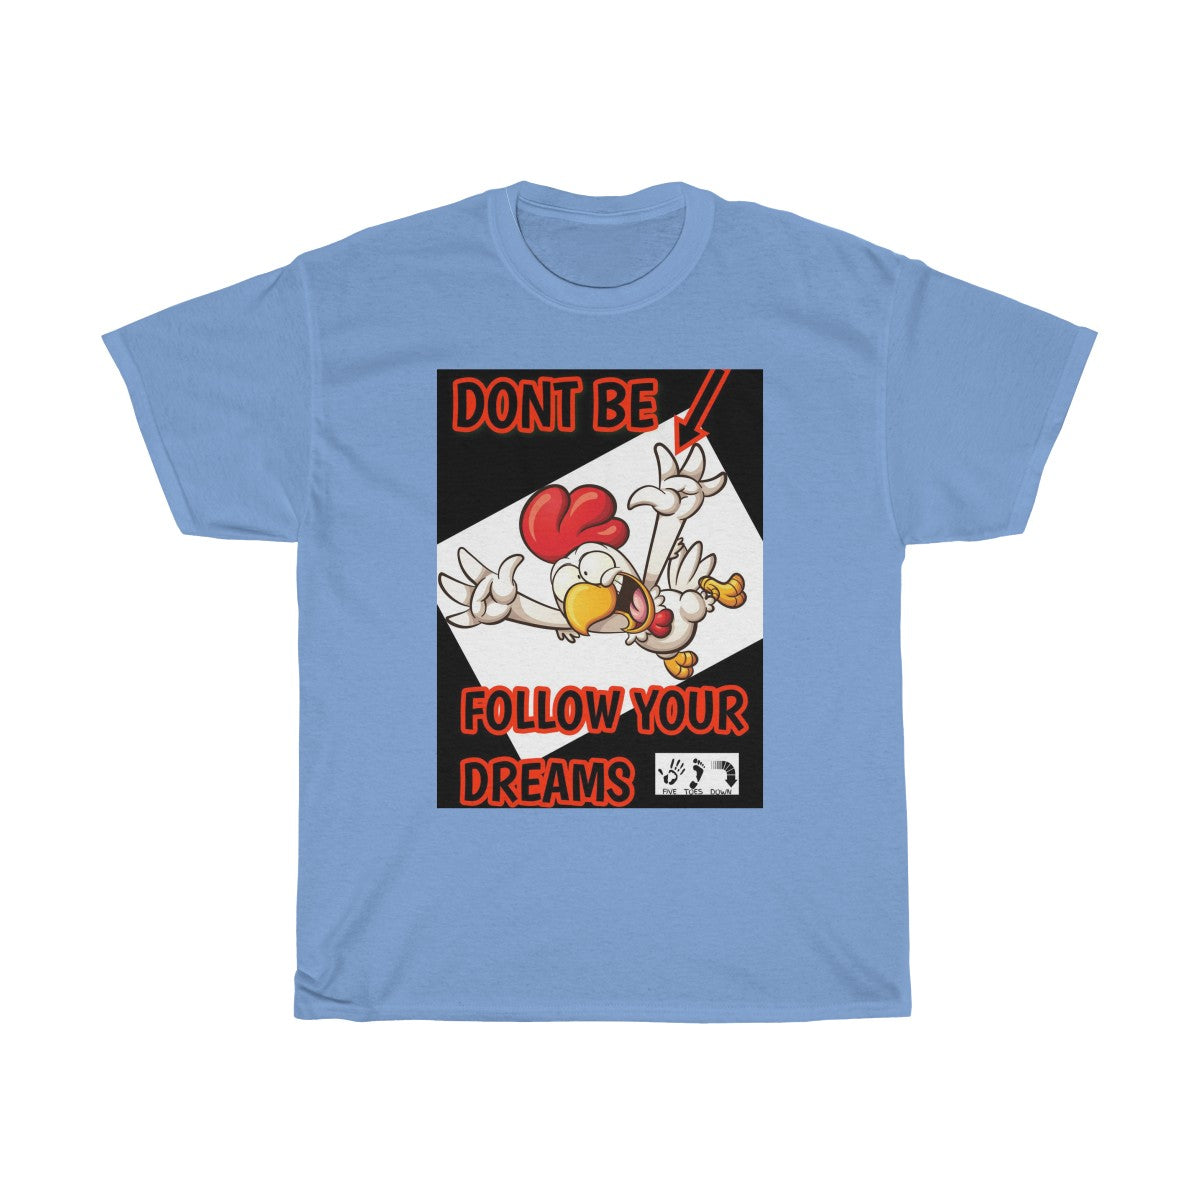 Five Toes Down Dont Be Chicken Unisex Tee